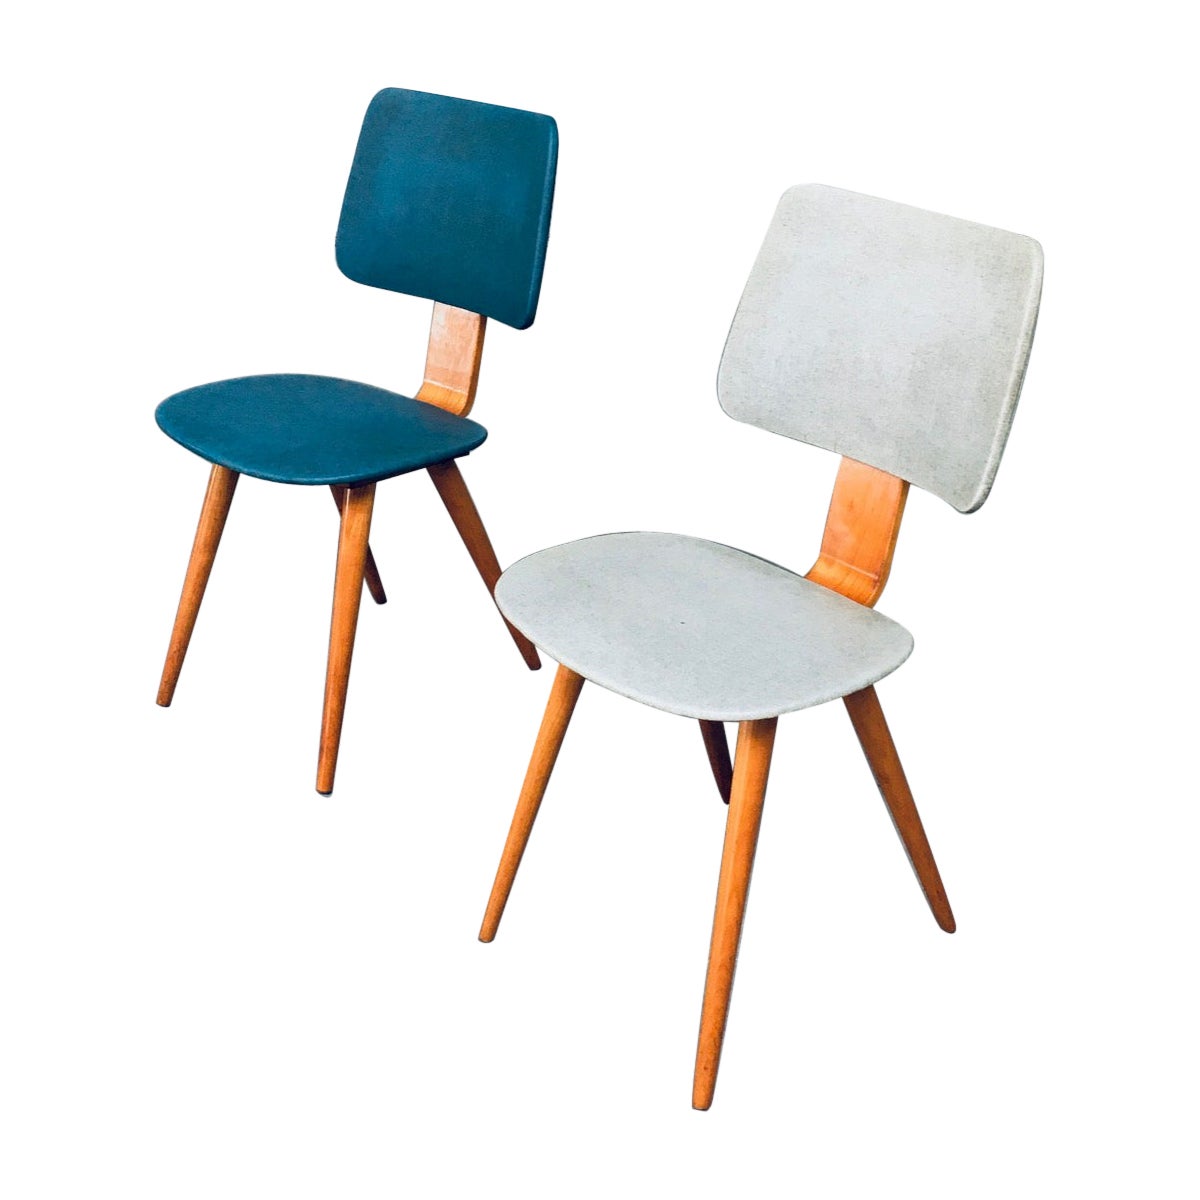 Dutch Design Side Chair Set by Cor Alons, Netherlands, 1950s